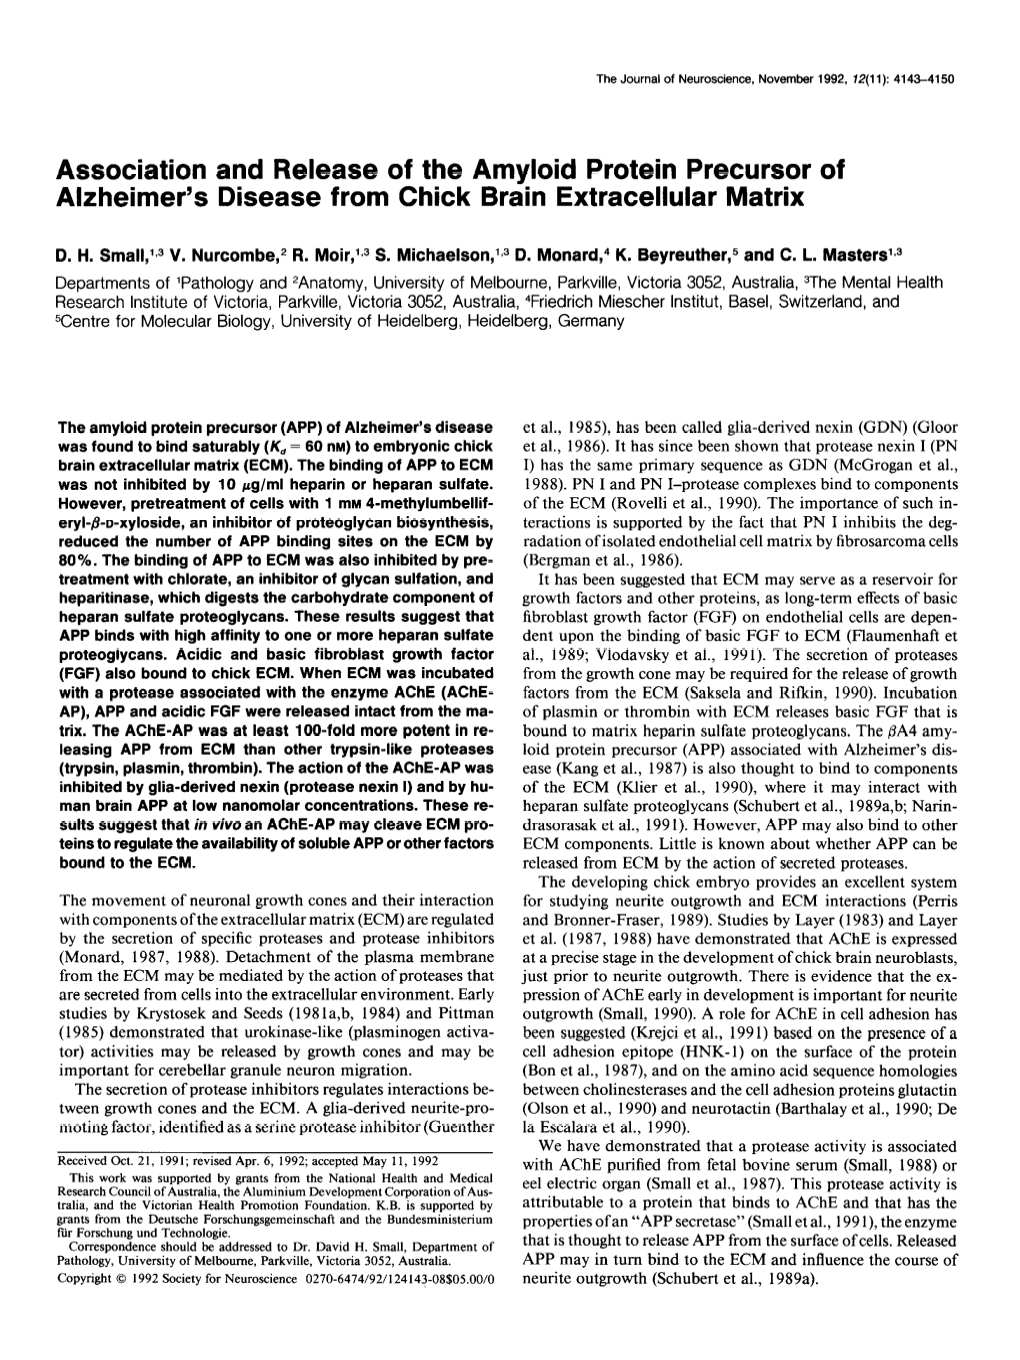 Association and Release of the Amyloid Protein Precursor of Alzheimer’S Disease from Chick Brain Extracellular Matrix